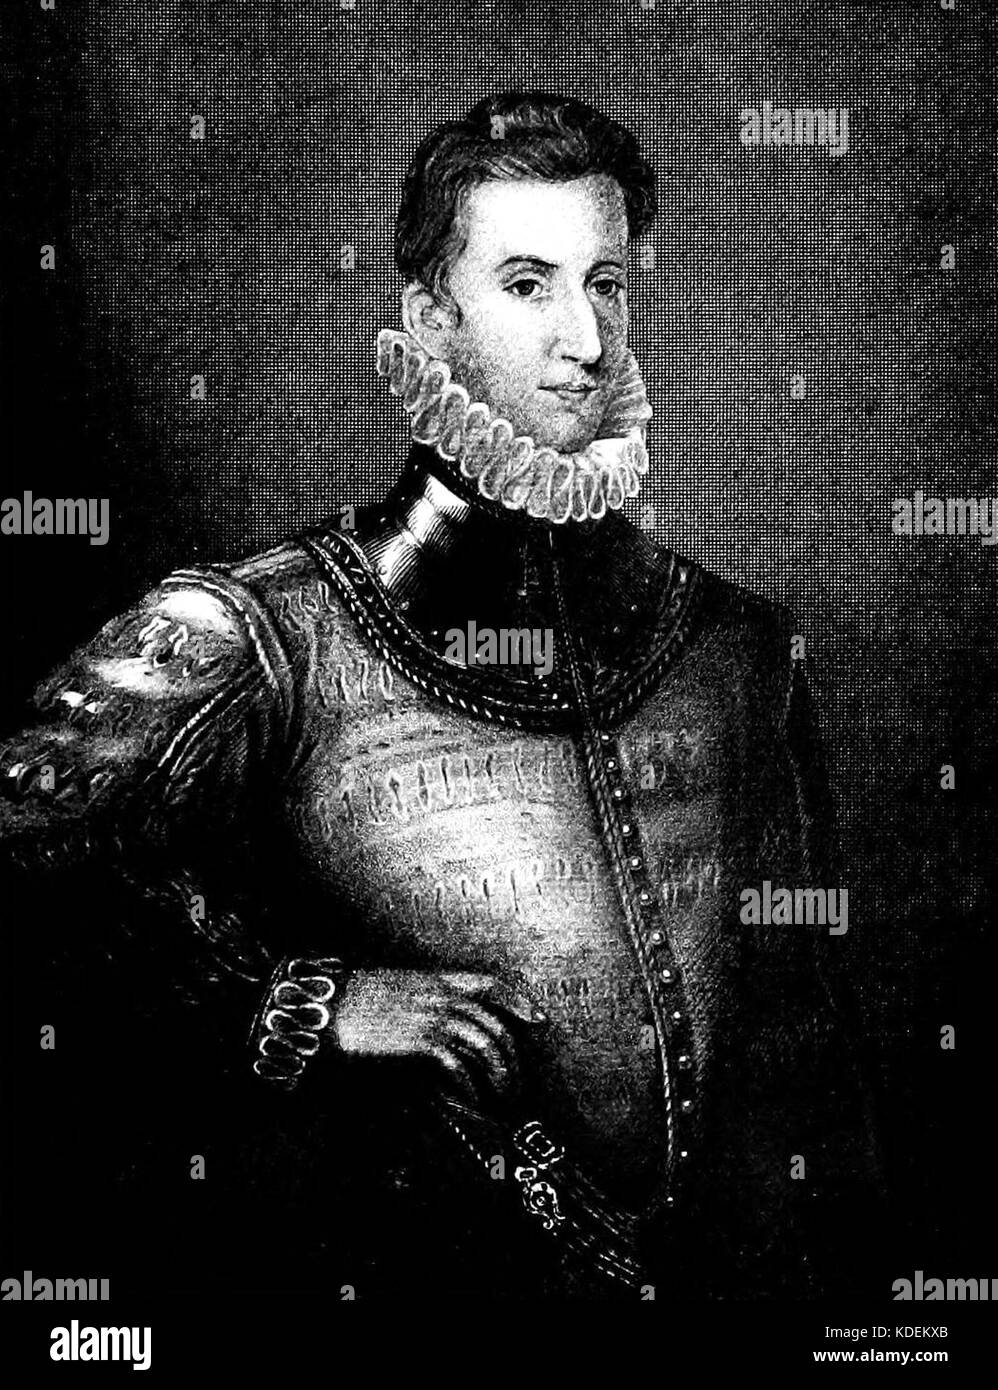 Portrait of Sir Philip Sidney, illusthatixg the ruff worn with armour  Elizabethan People (book) Stock Photo